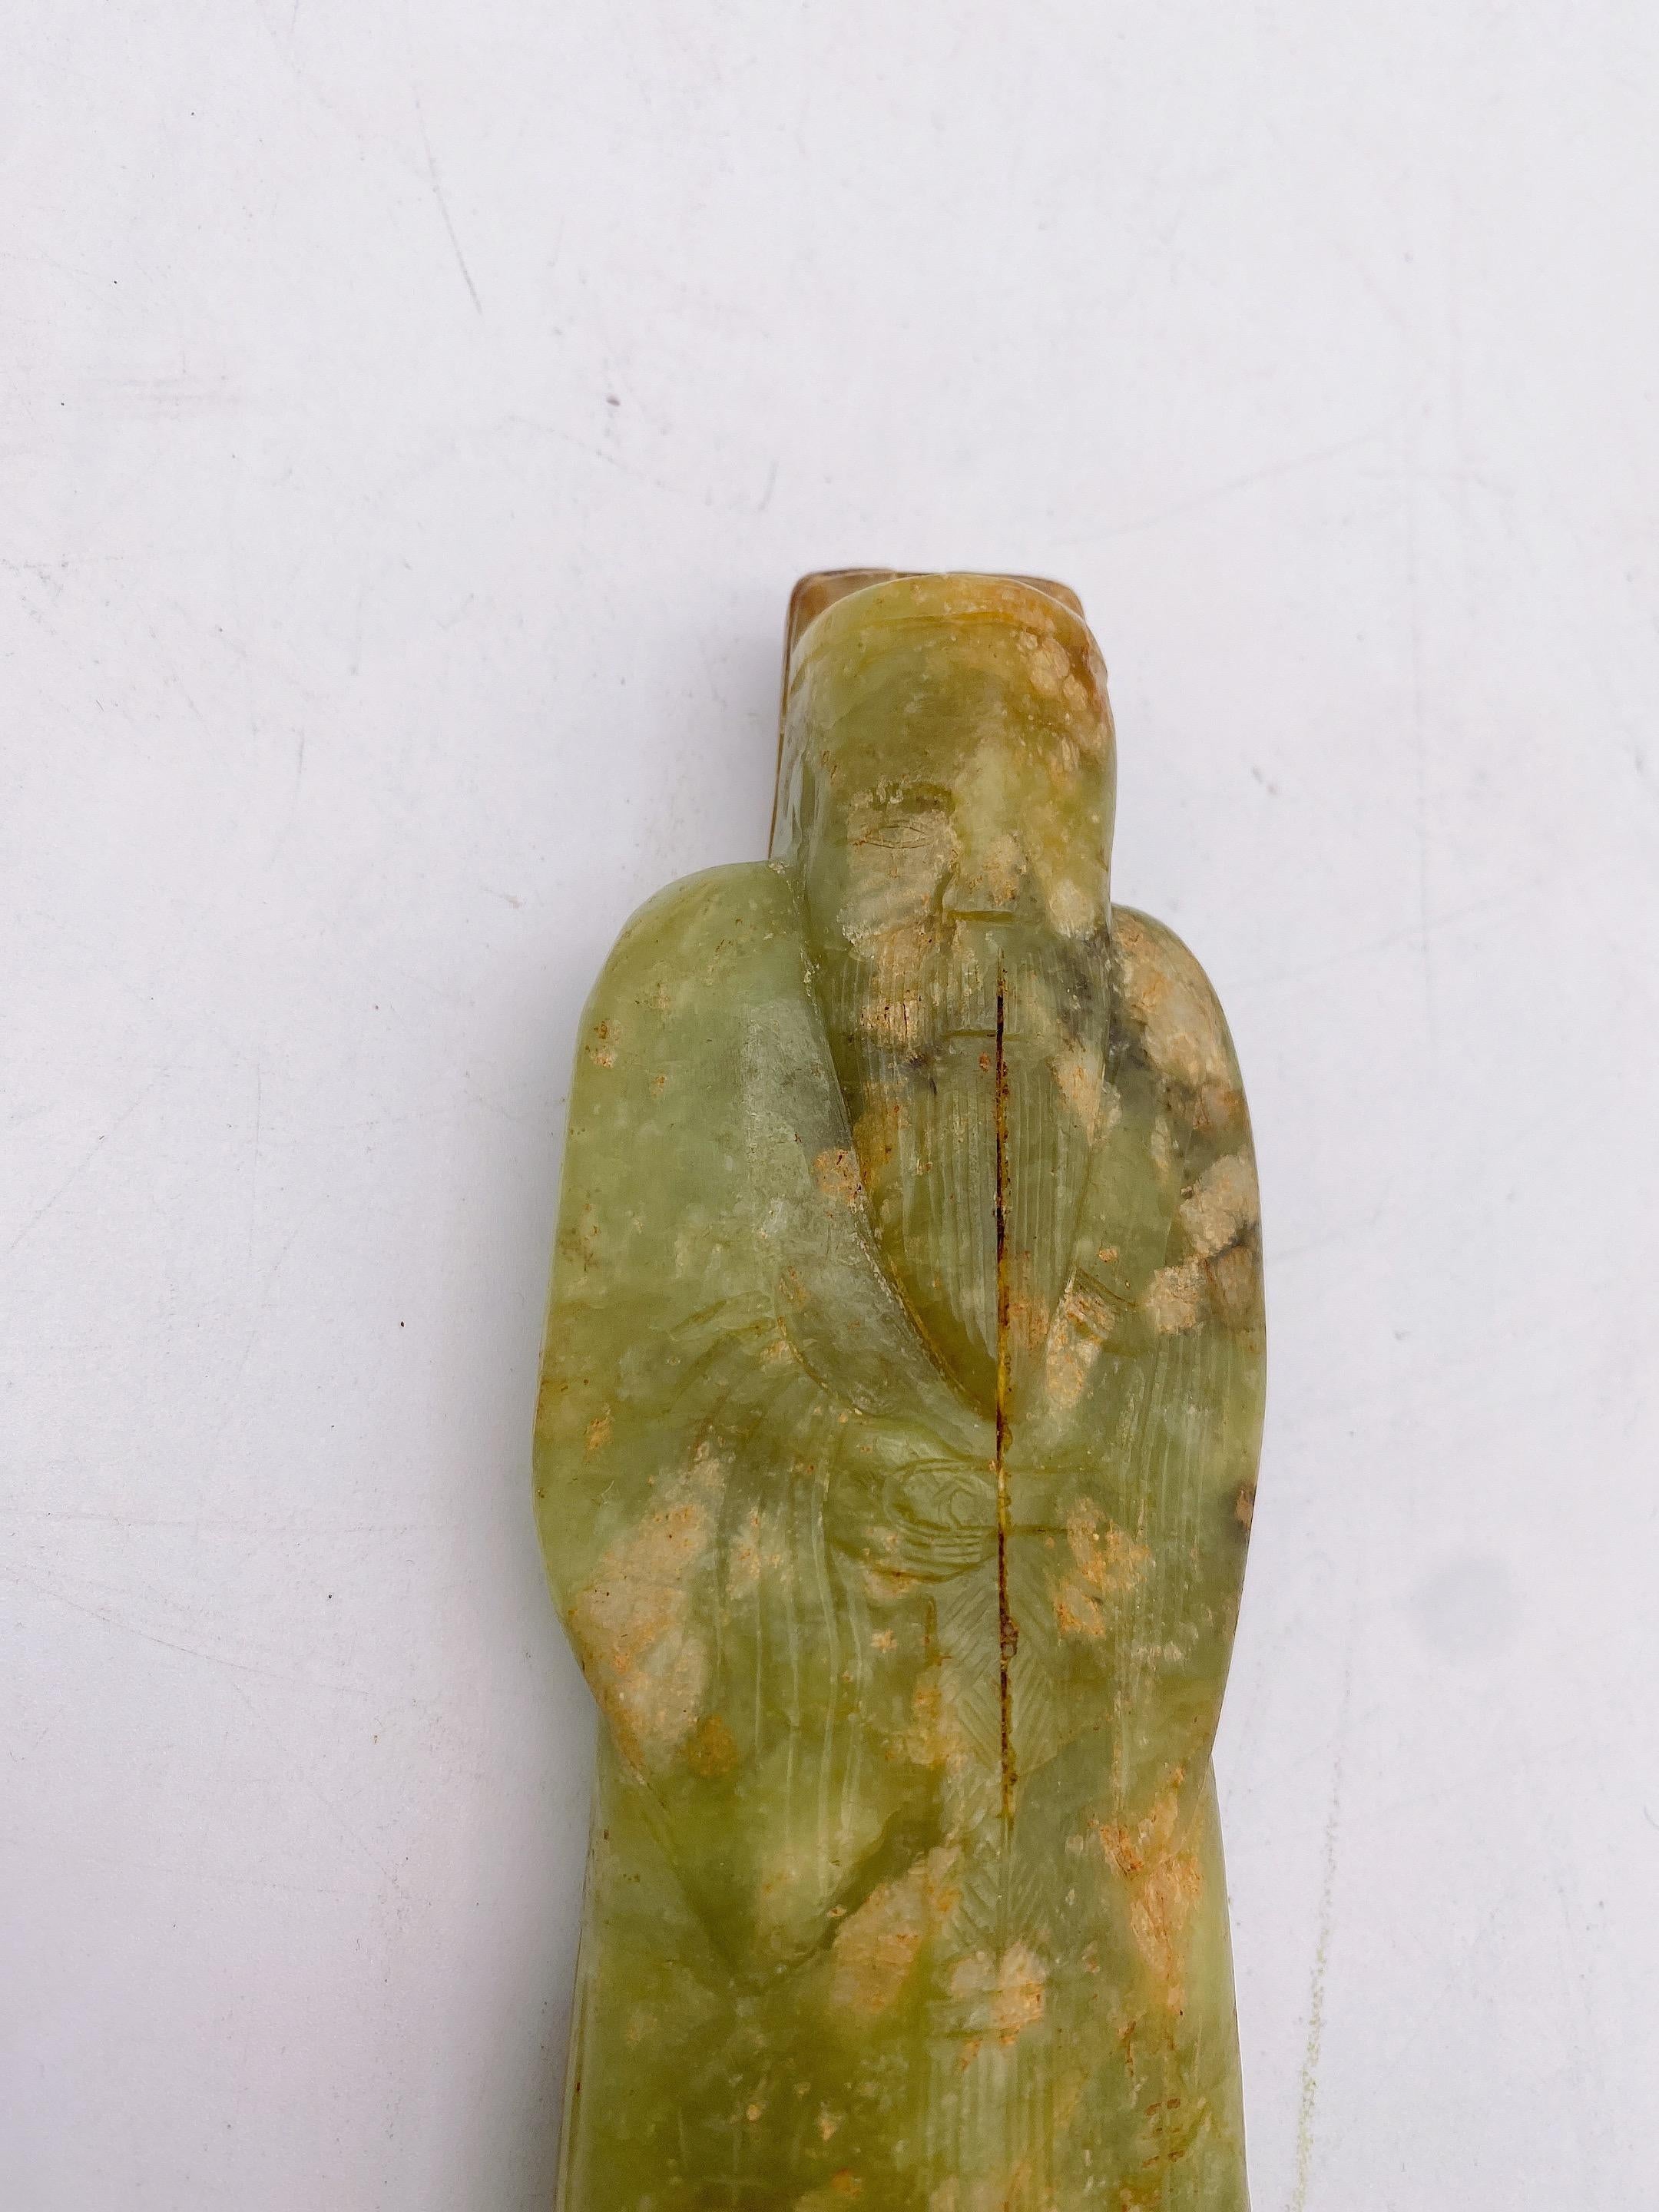 Antique an Chinese carved green river jade figure of an immortal ming/qing modelled wearing robes,
Size: 14cm x 5.5cmx 3cm. Weight 382g.